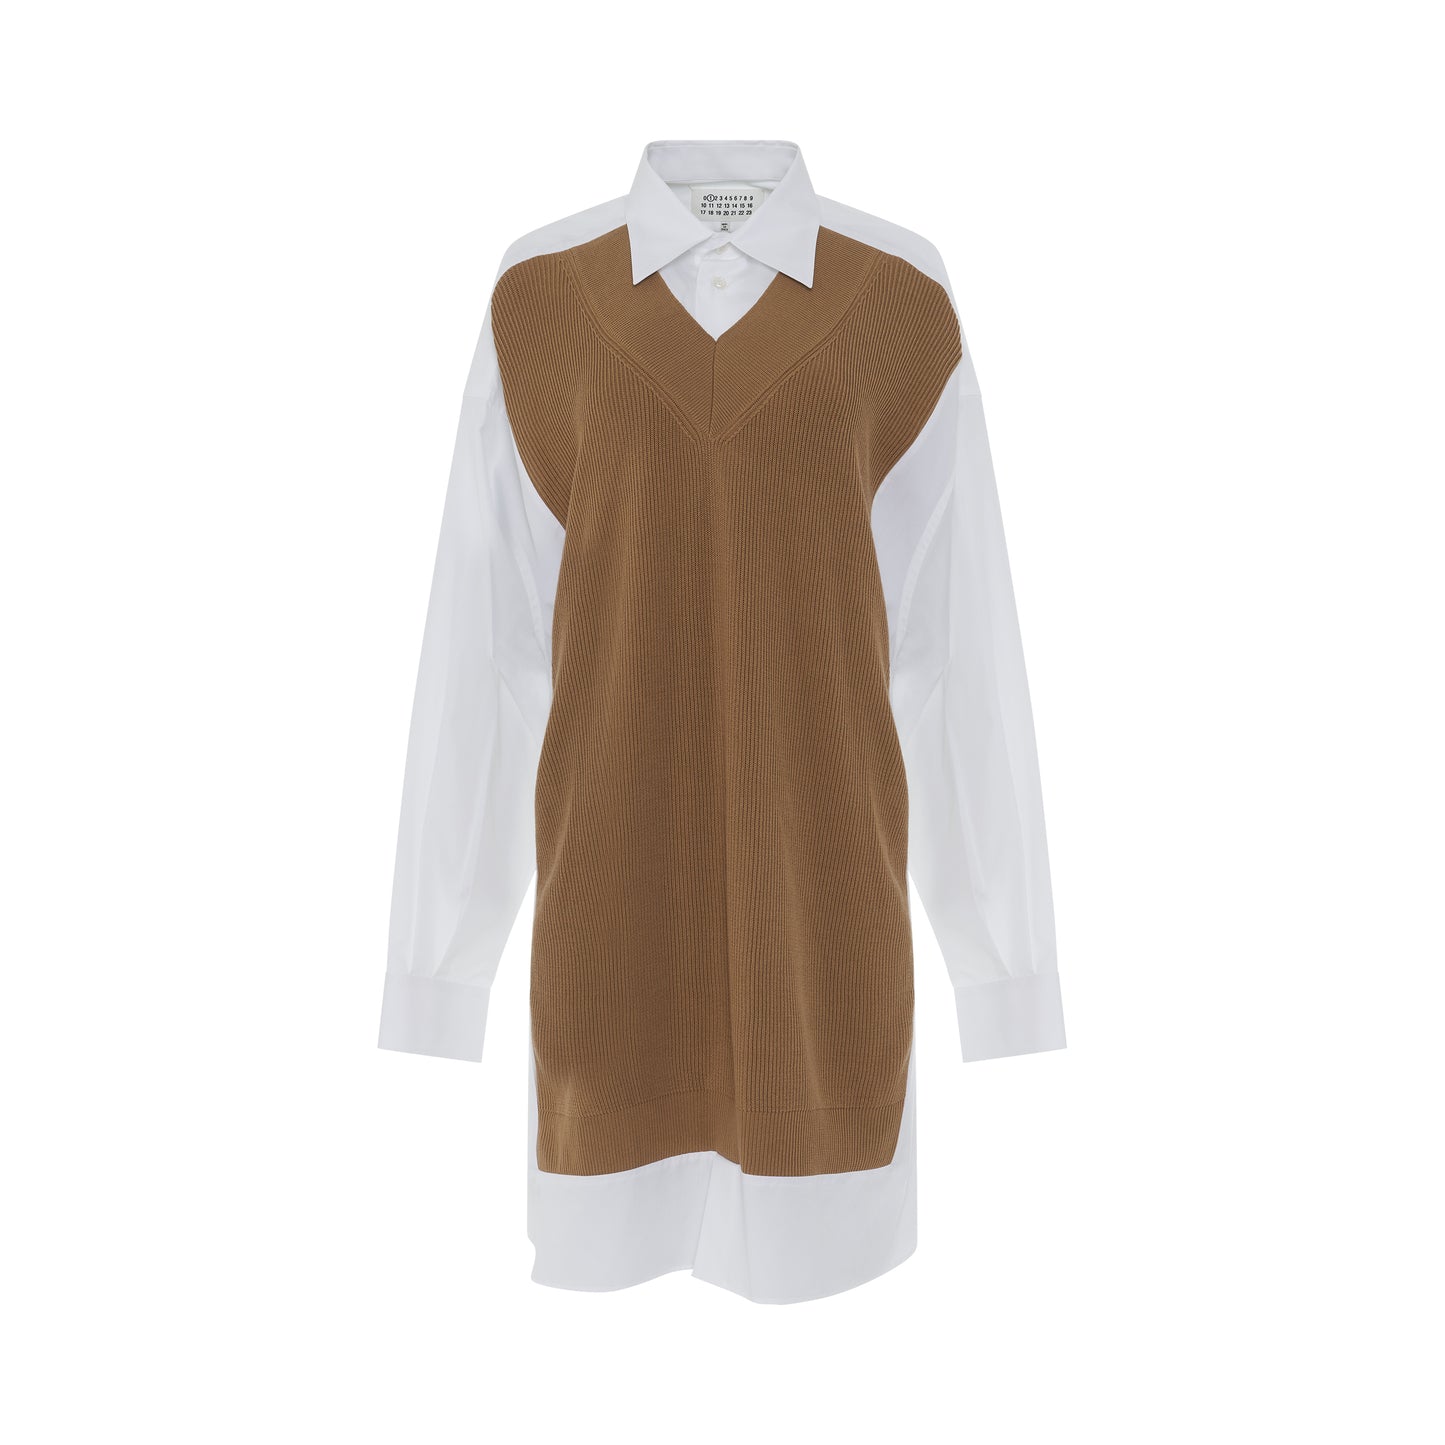 Layered Shirt with Knit Vest in White/Camel